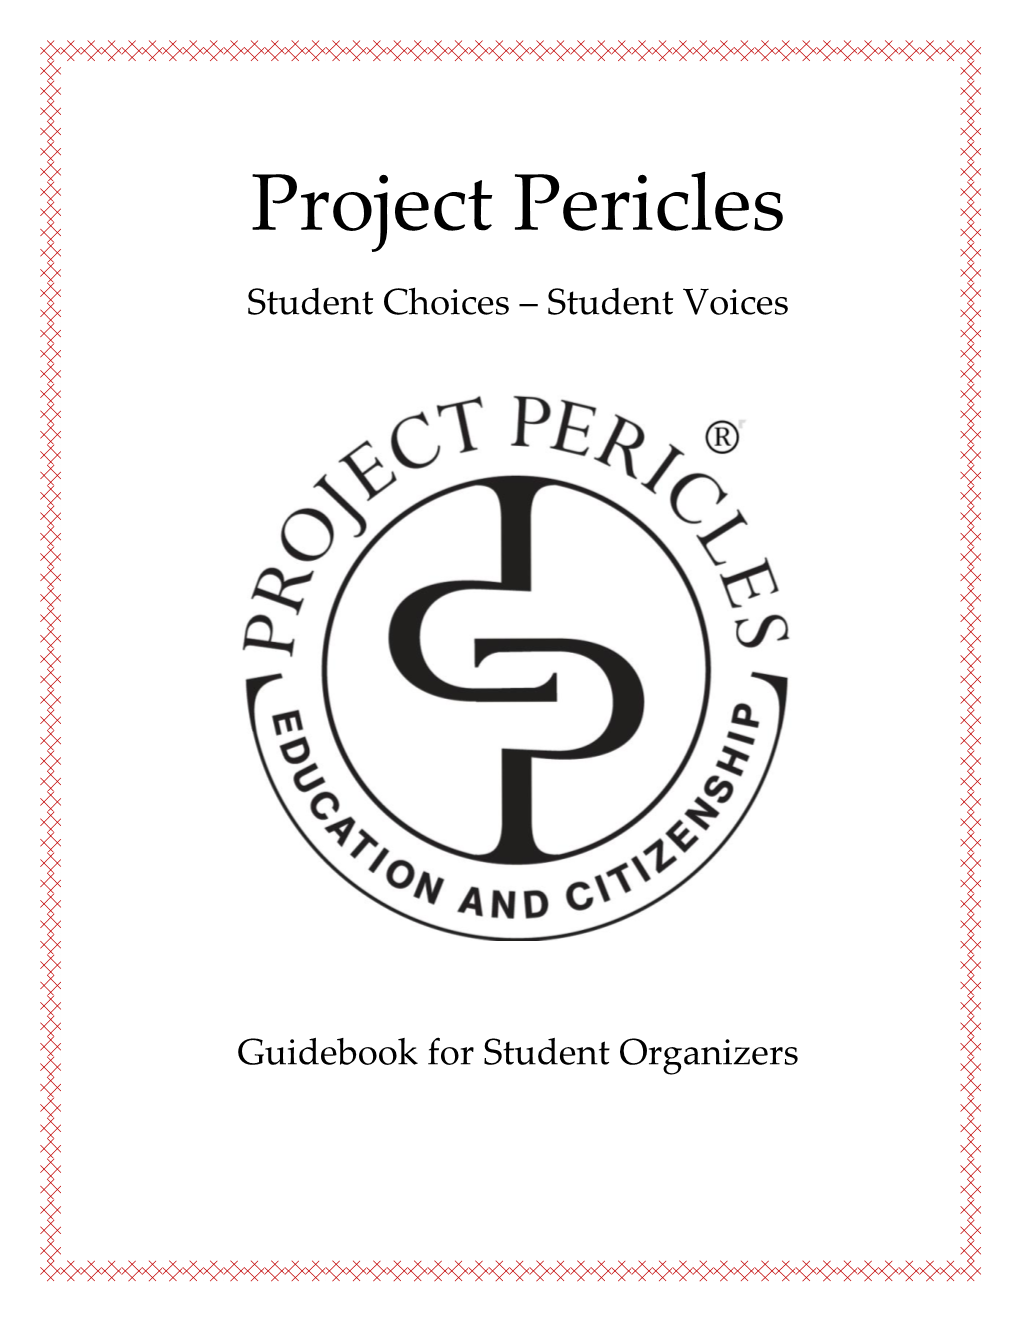 Project Pericles Student Choices – Student Voices